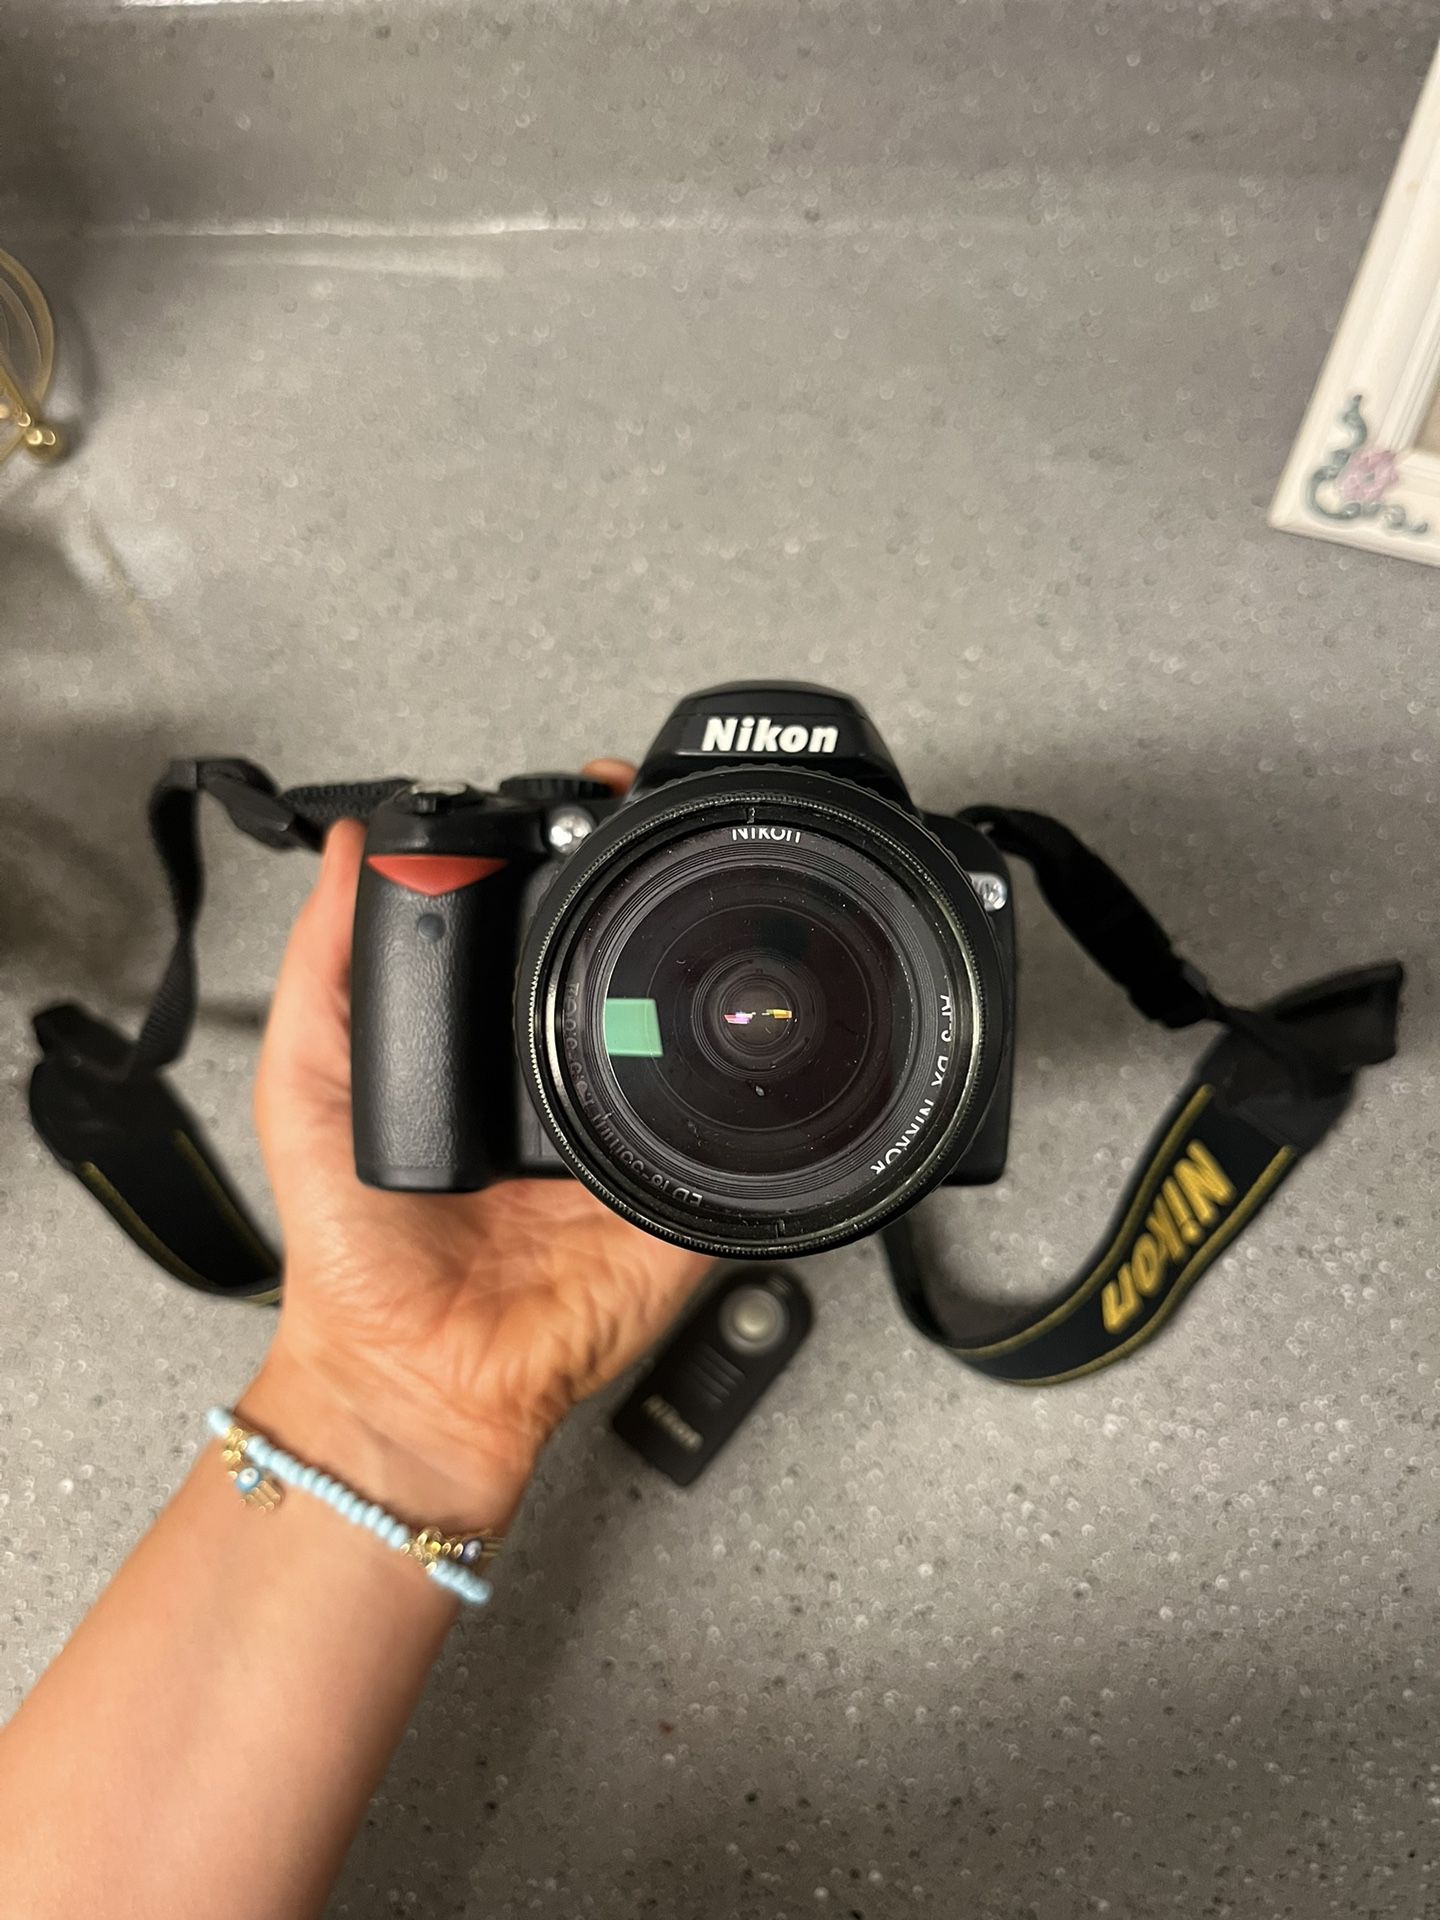 Nikon D40x Camera (Charger, Zoom lens, Clicker Included)